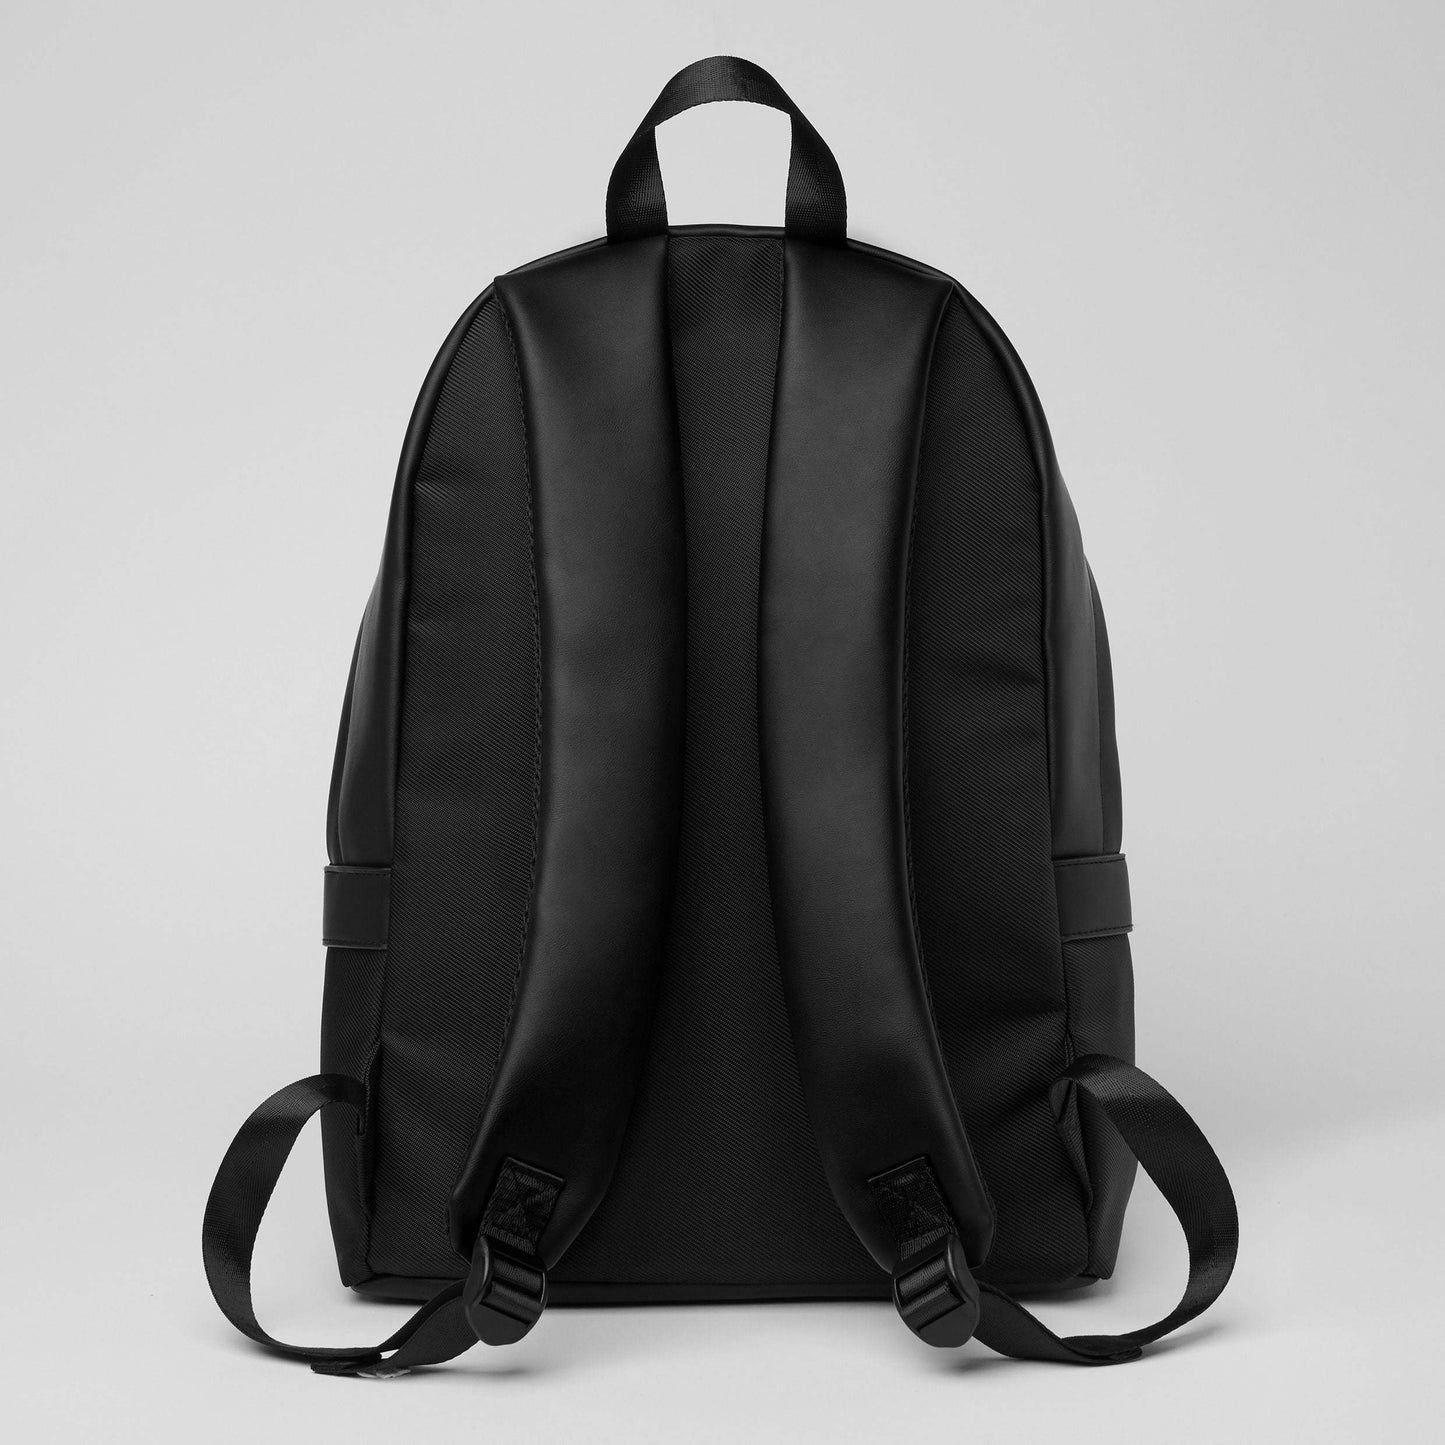 Bond Backpack by Cerruti 1881 - The Luxury Promotional Gifts Company Limited